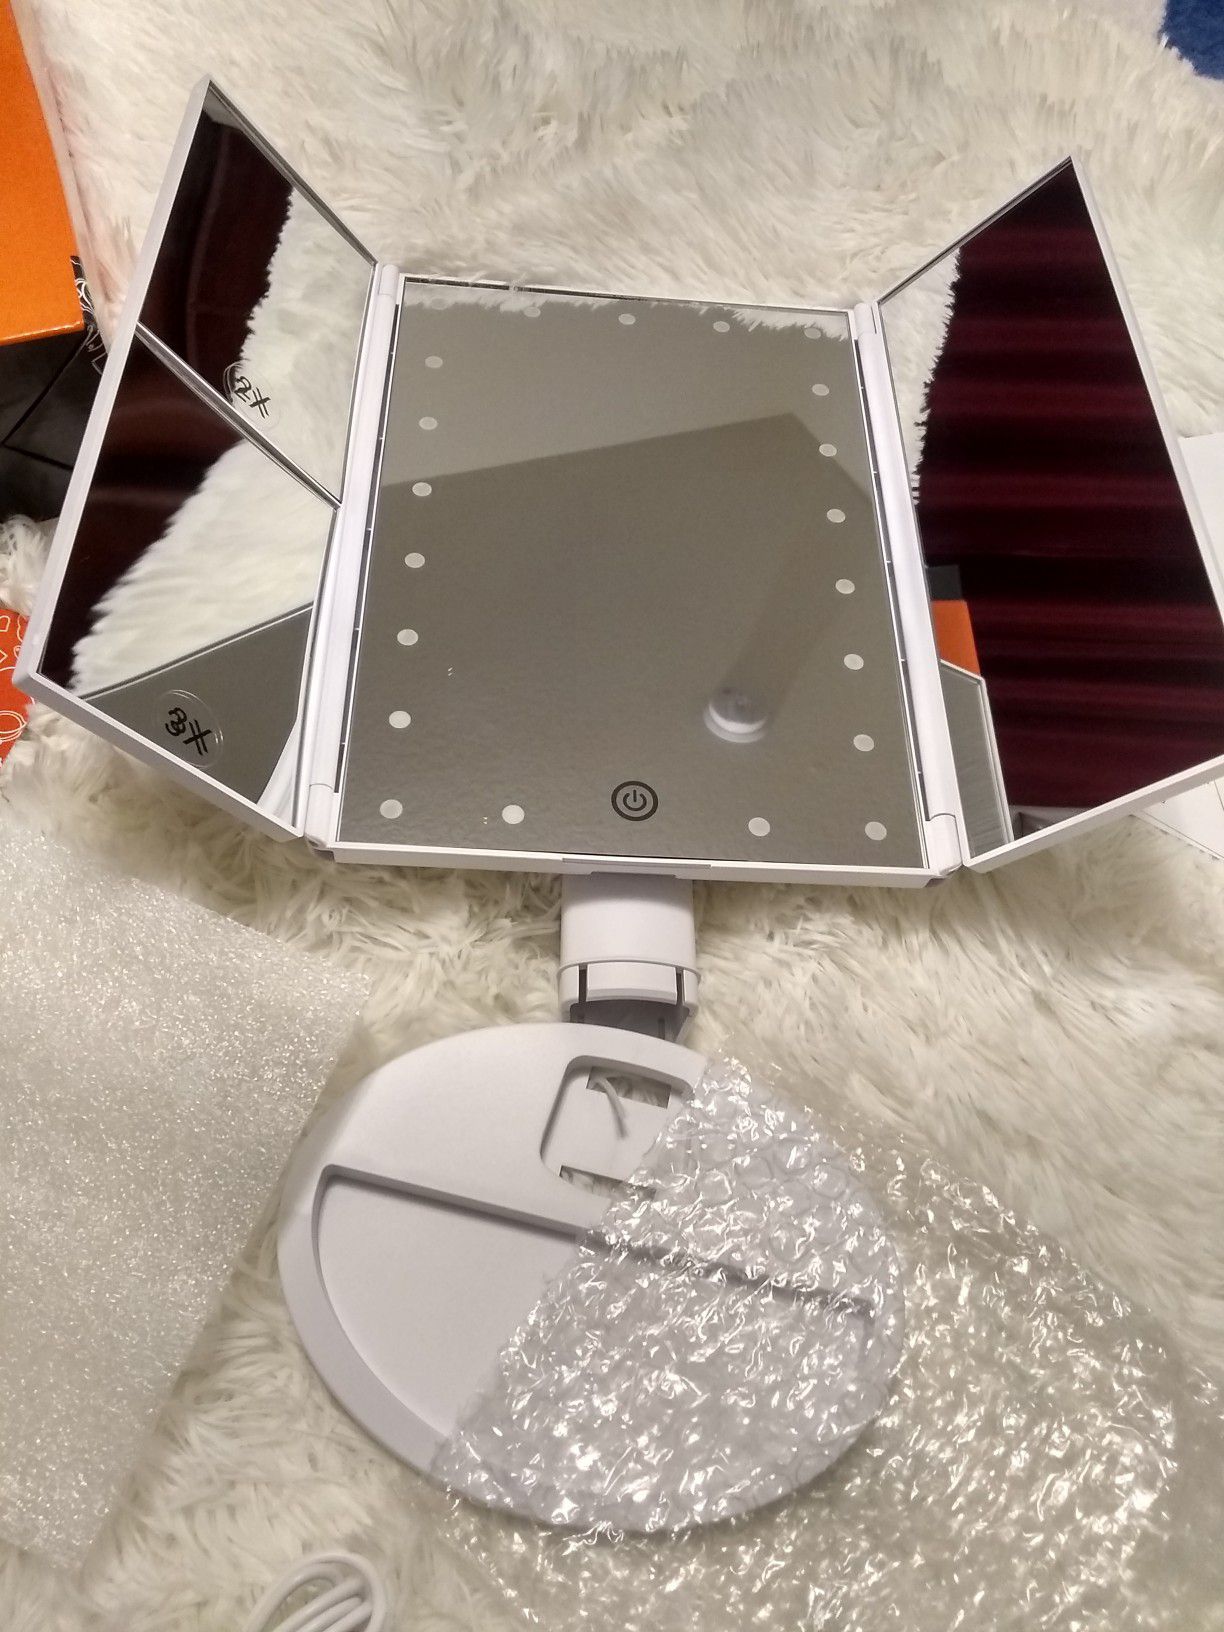 Trifold lighted makeup mirror. New in box. Meet at 7-Eleven 2361 E. Alameda St., Norman, OK 73071. Available if posted. NO TRADES!! Cash only.